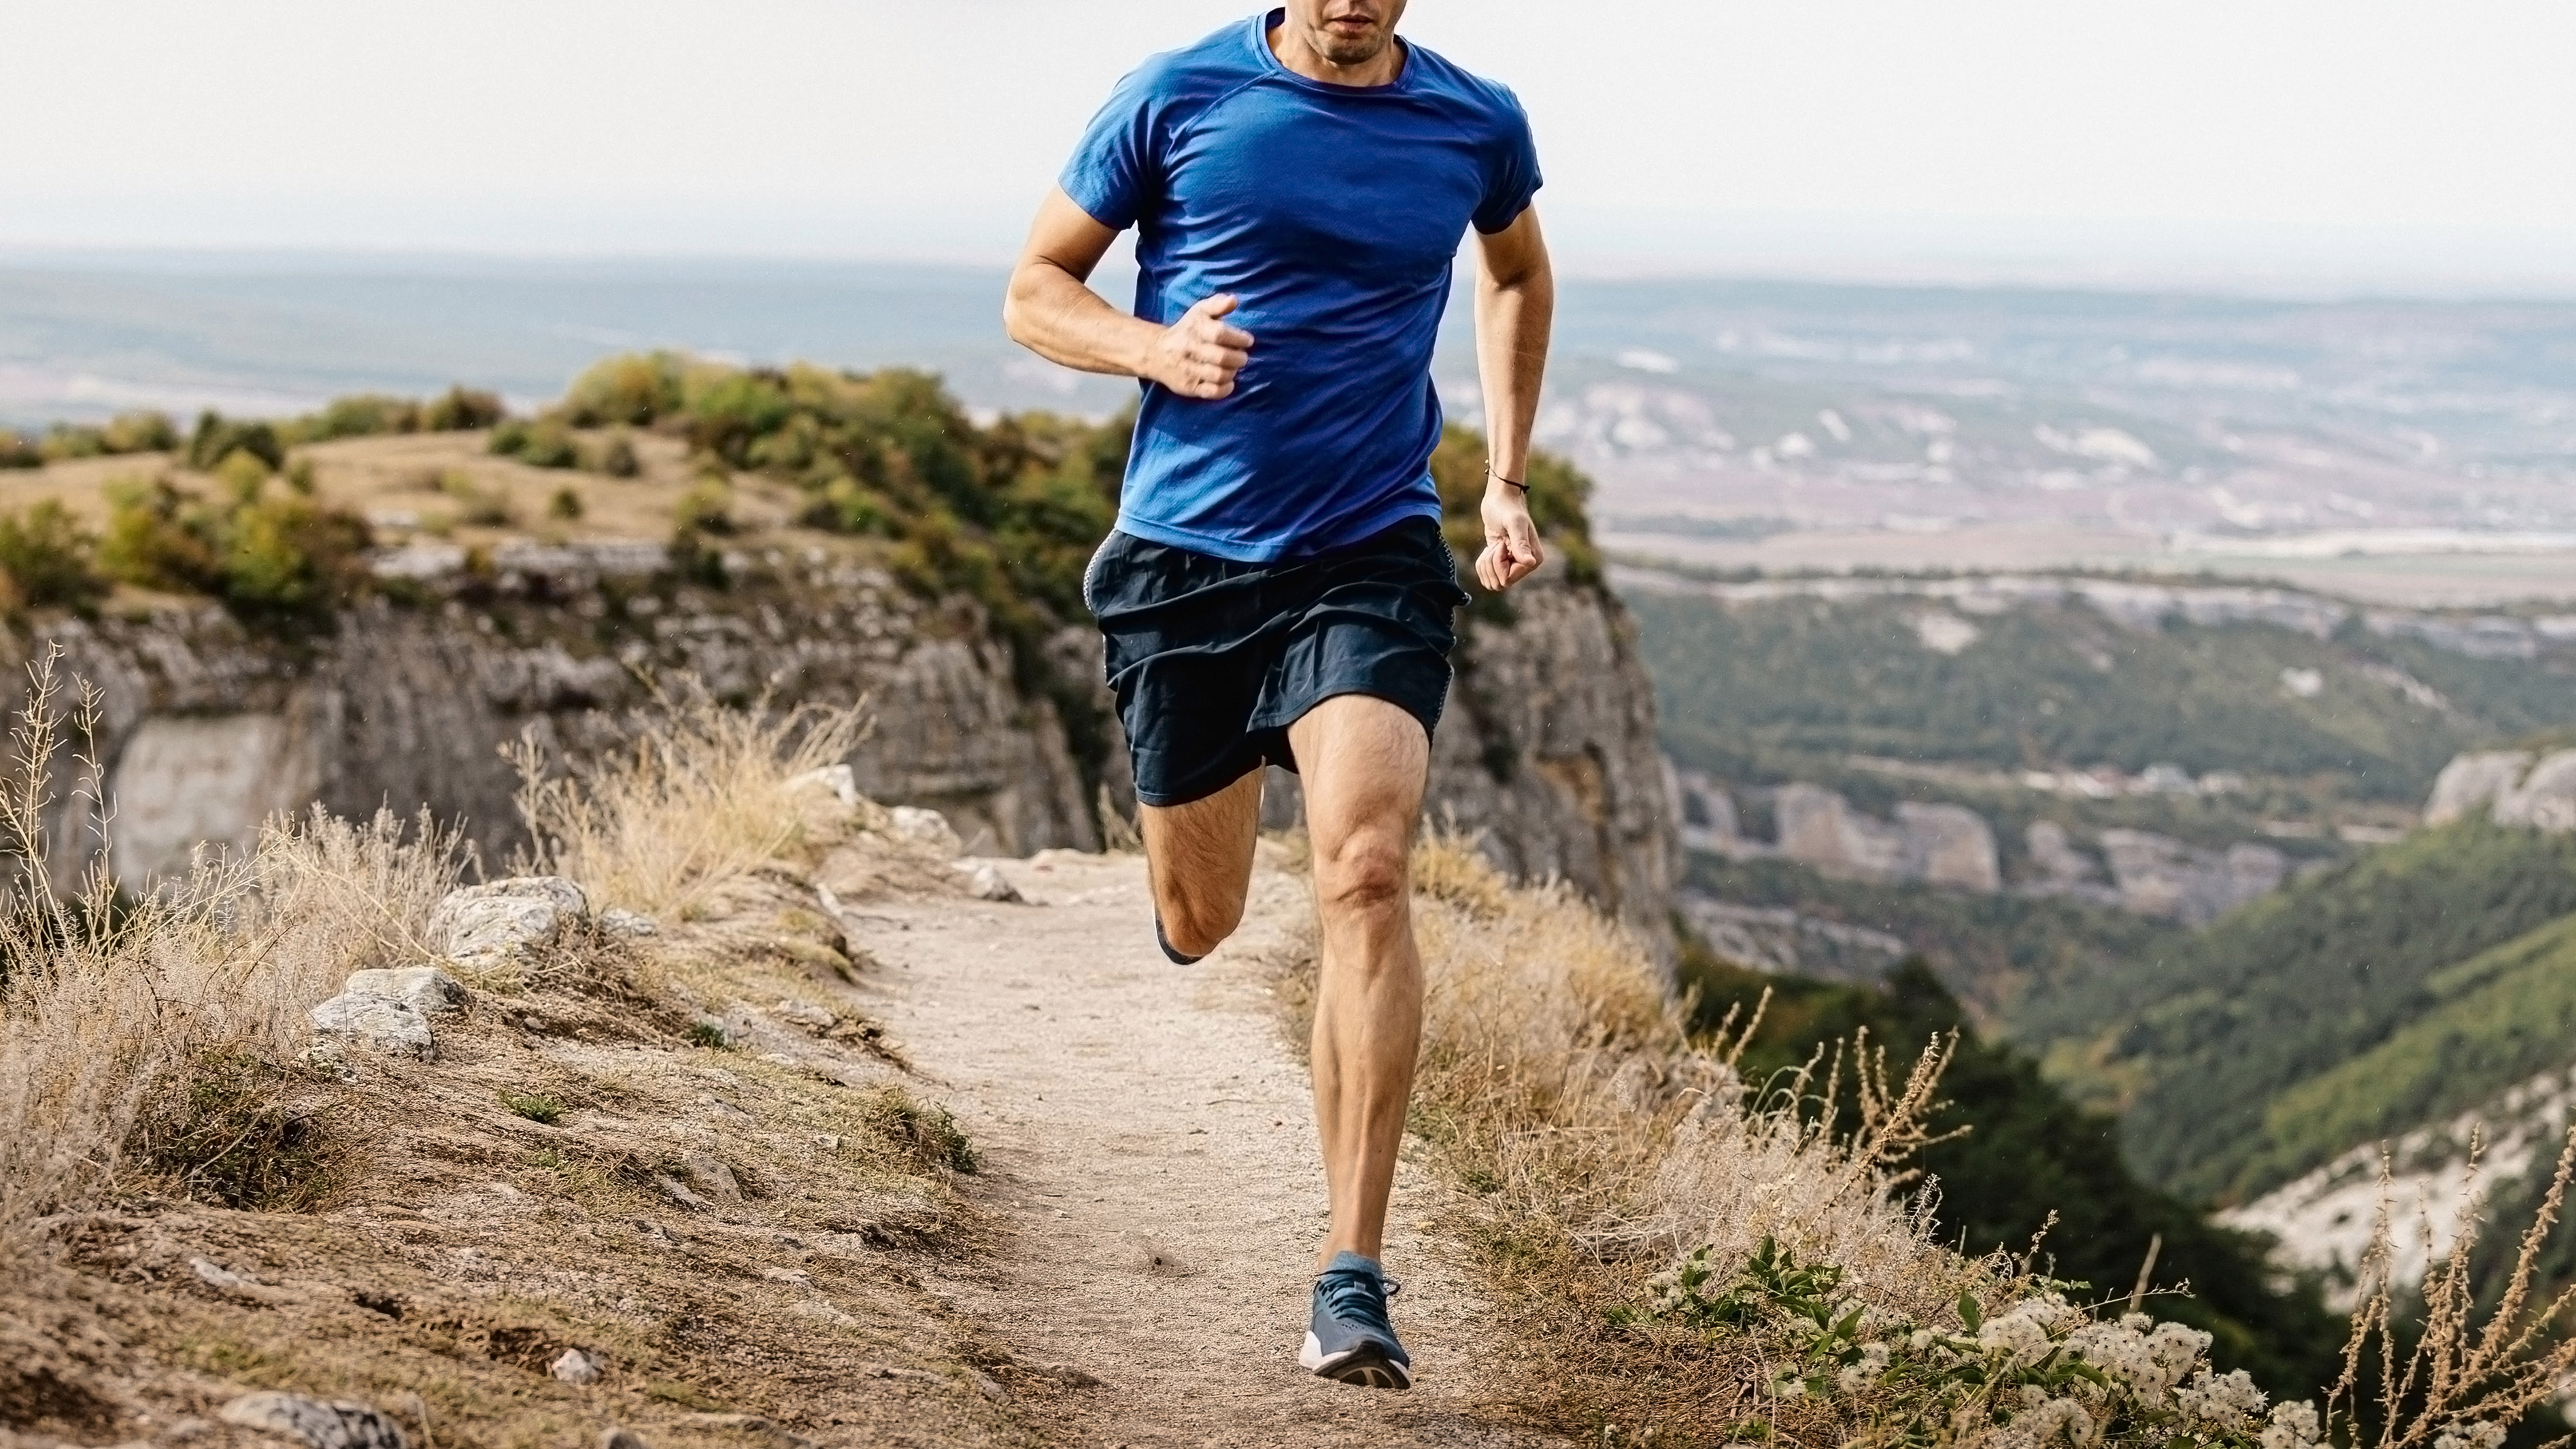 Trail running vs road running: the pros and cons of each | Advnture